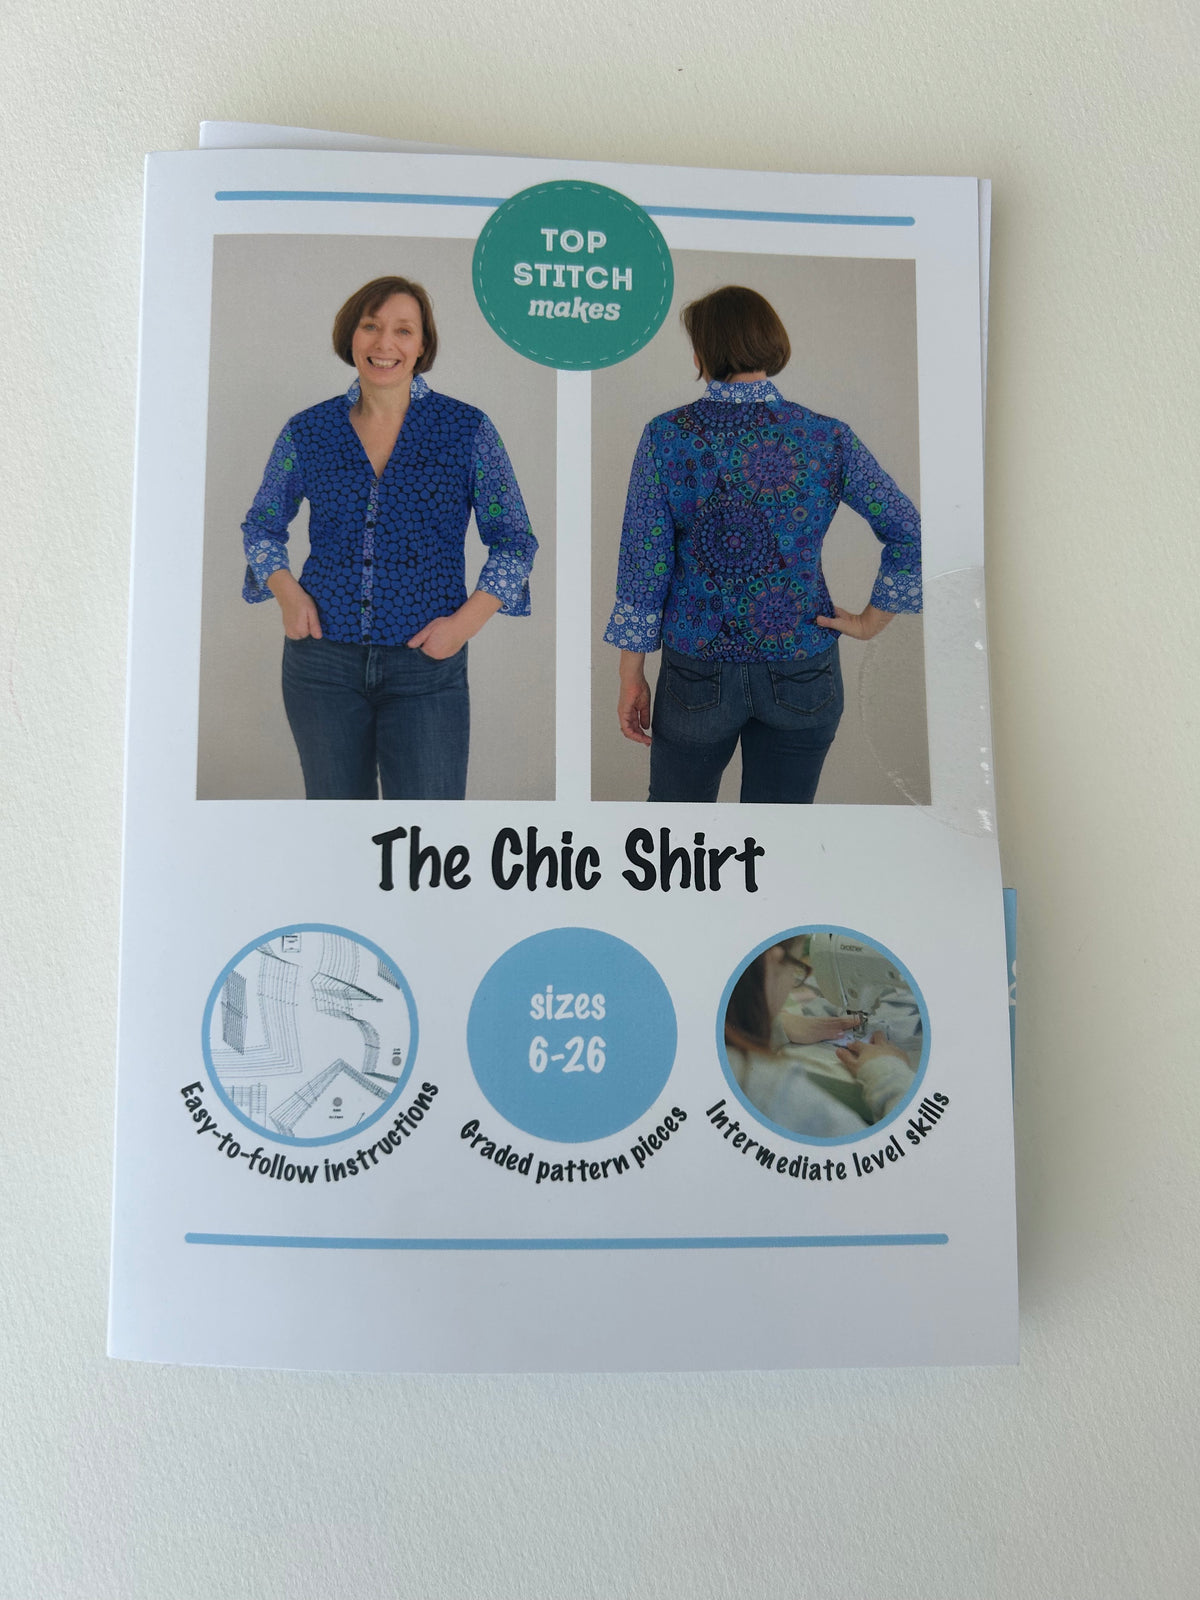 Top Stitch Makes - The Chic Shirt